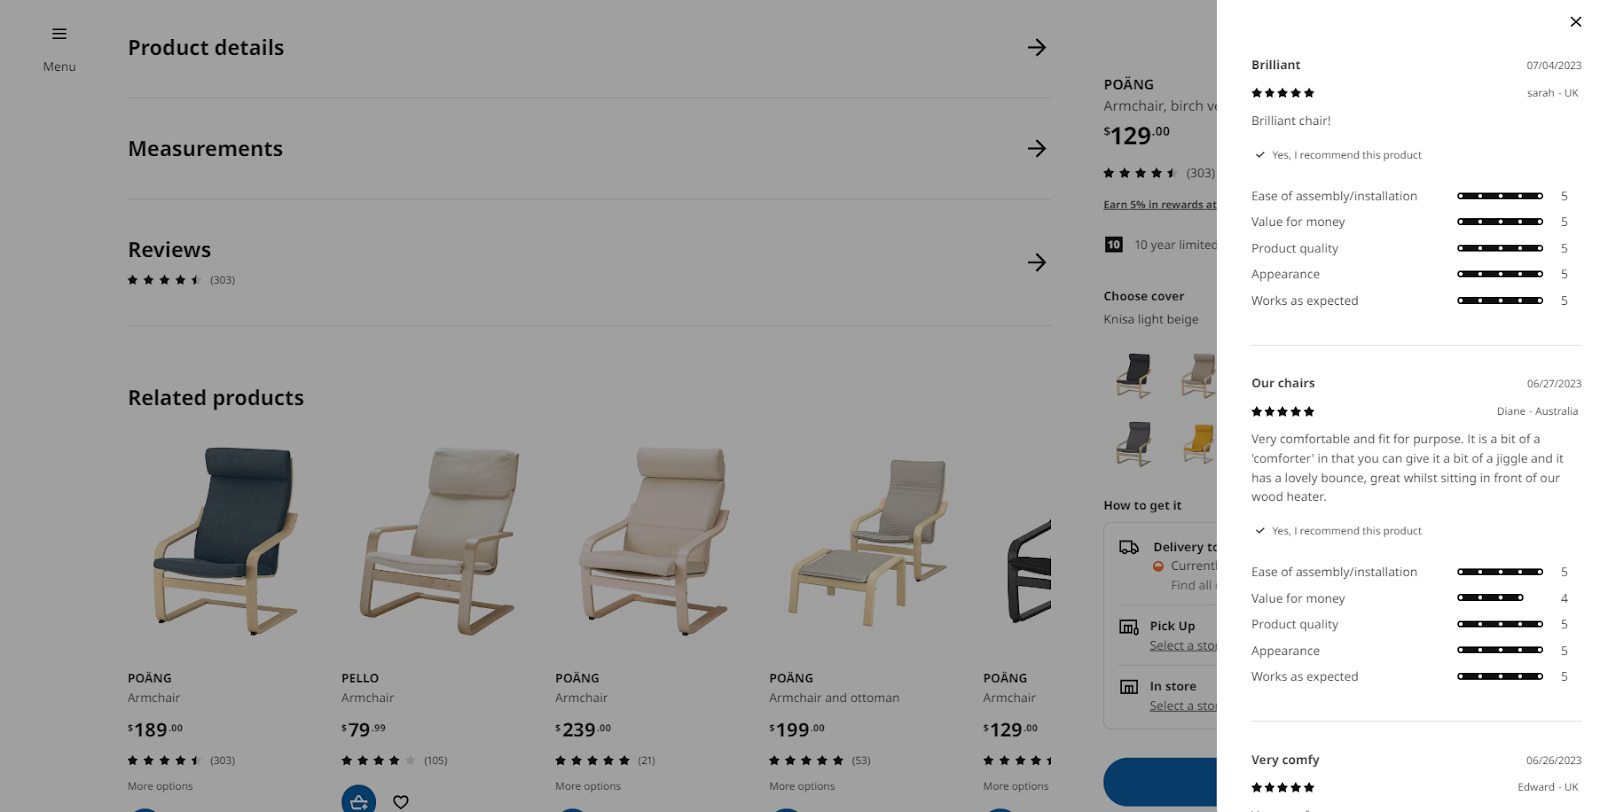 Ikea chairs, Leverage reviews and ratings to build social proof.